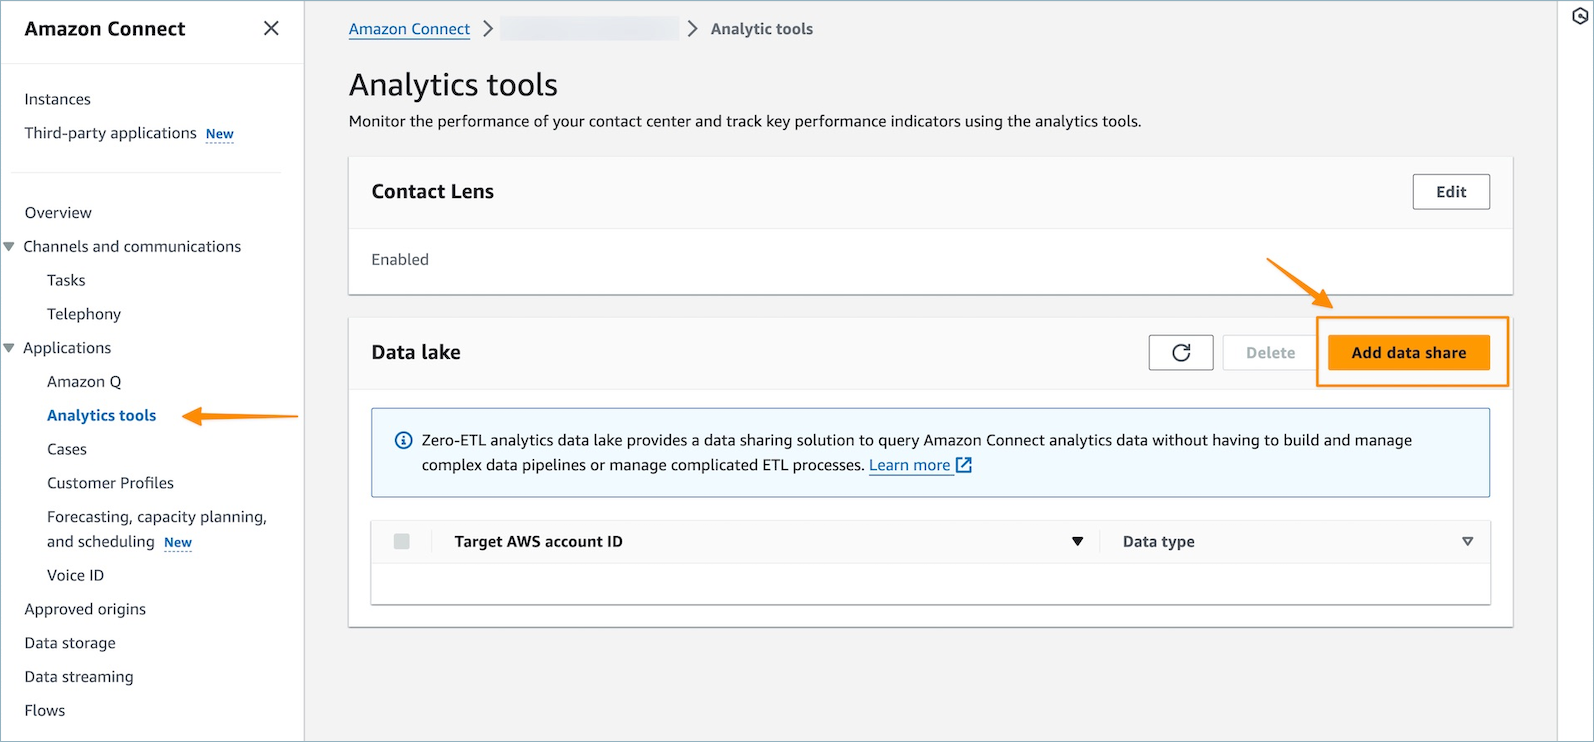 The Amazon Connect analytics tools page.